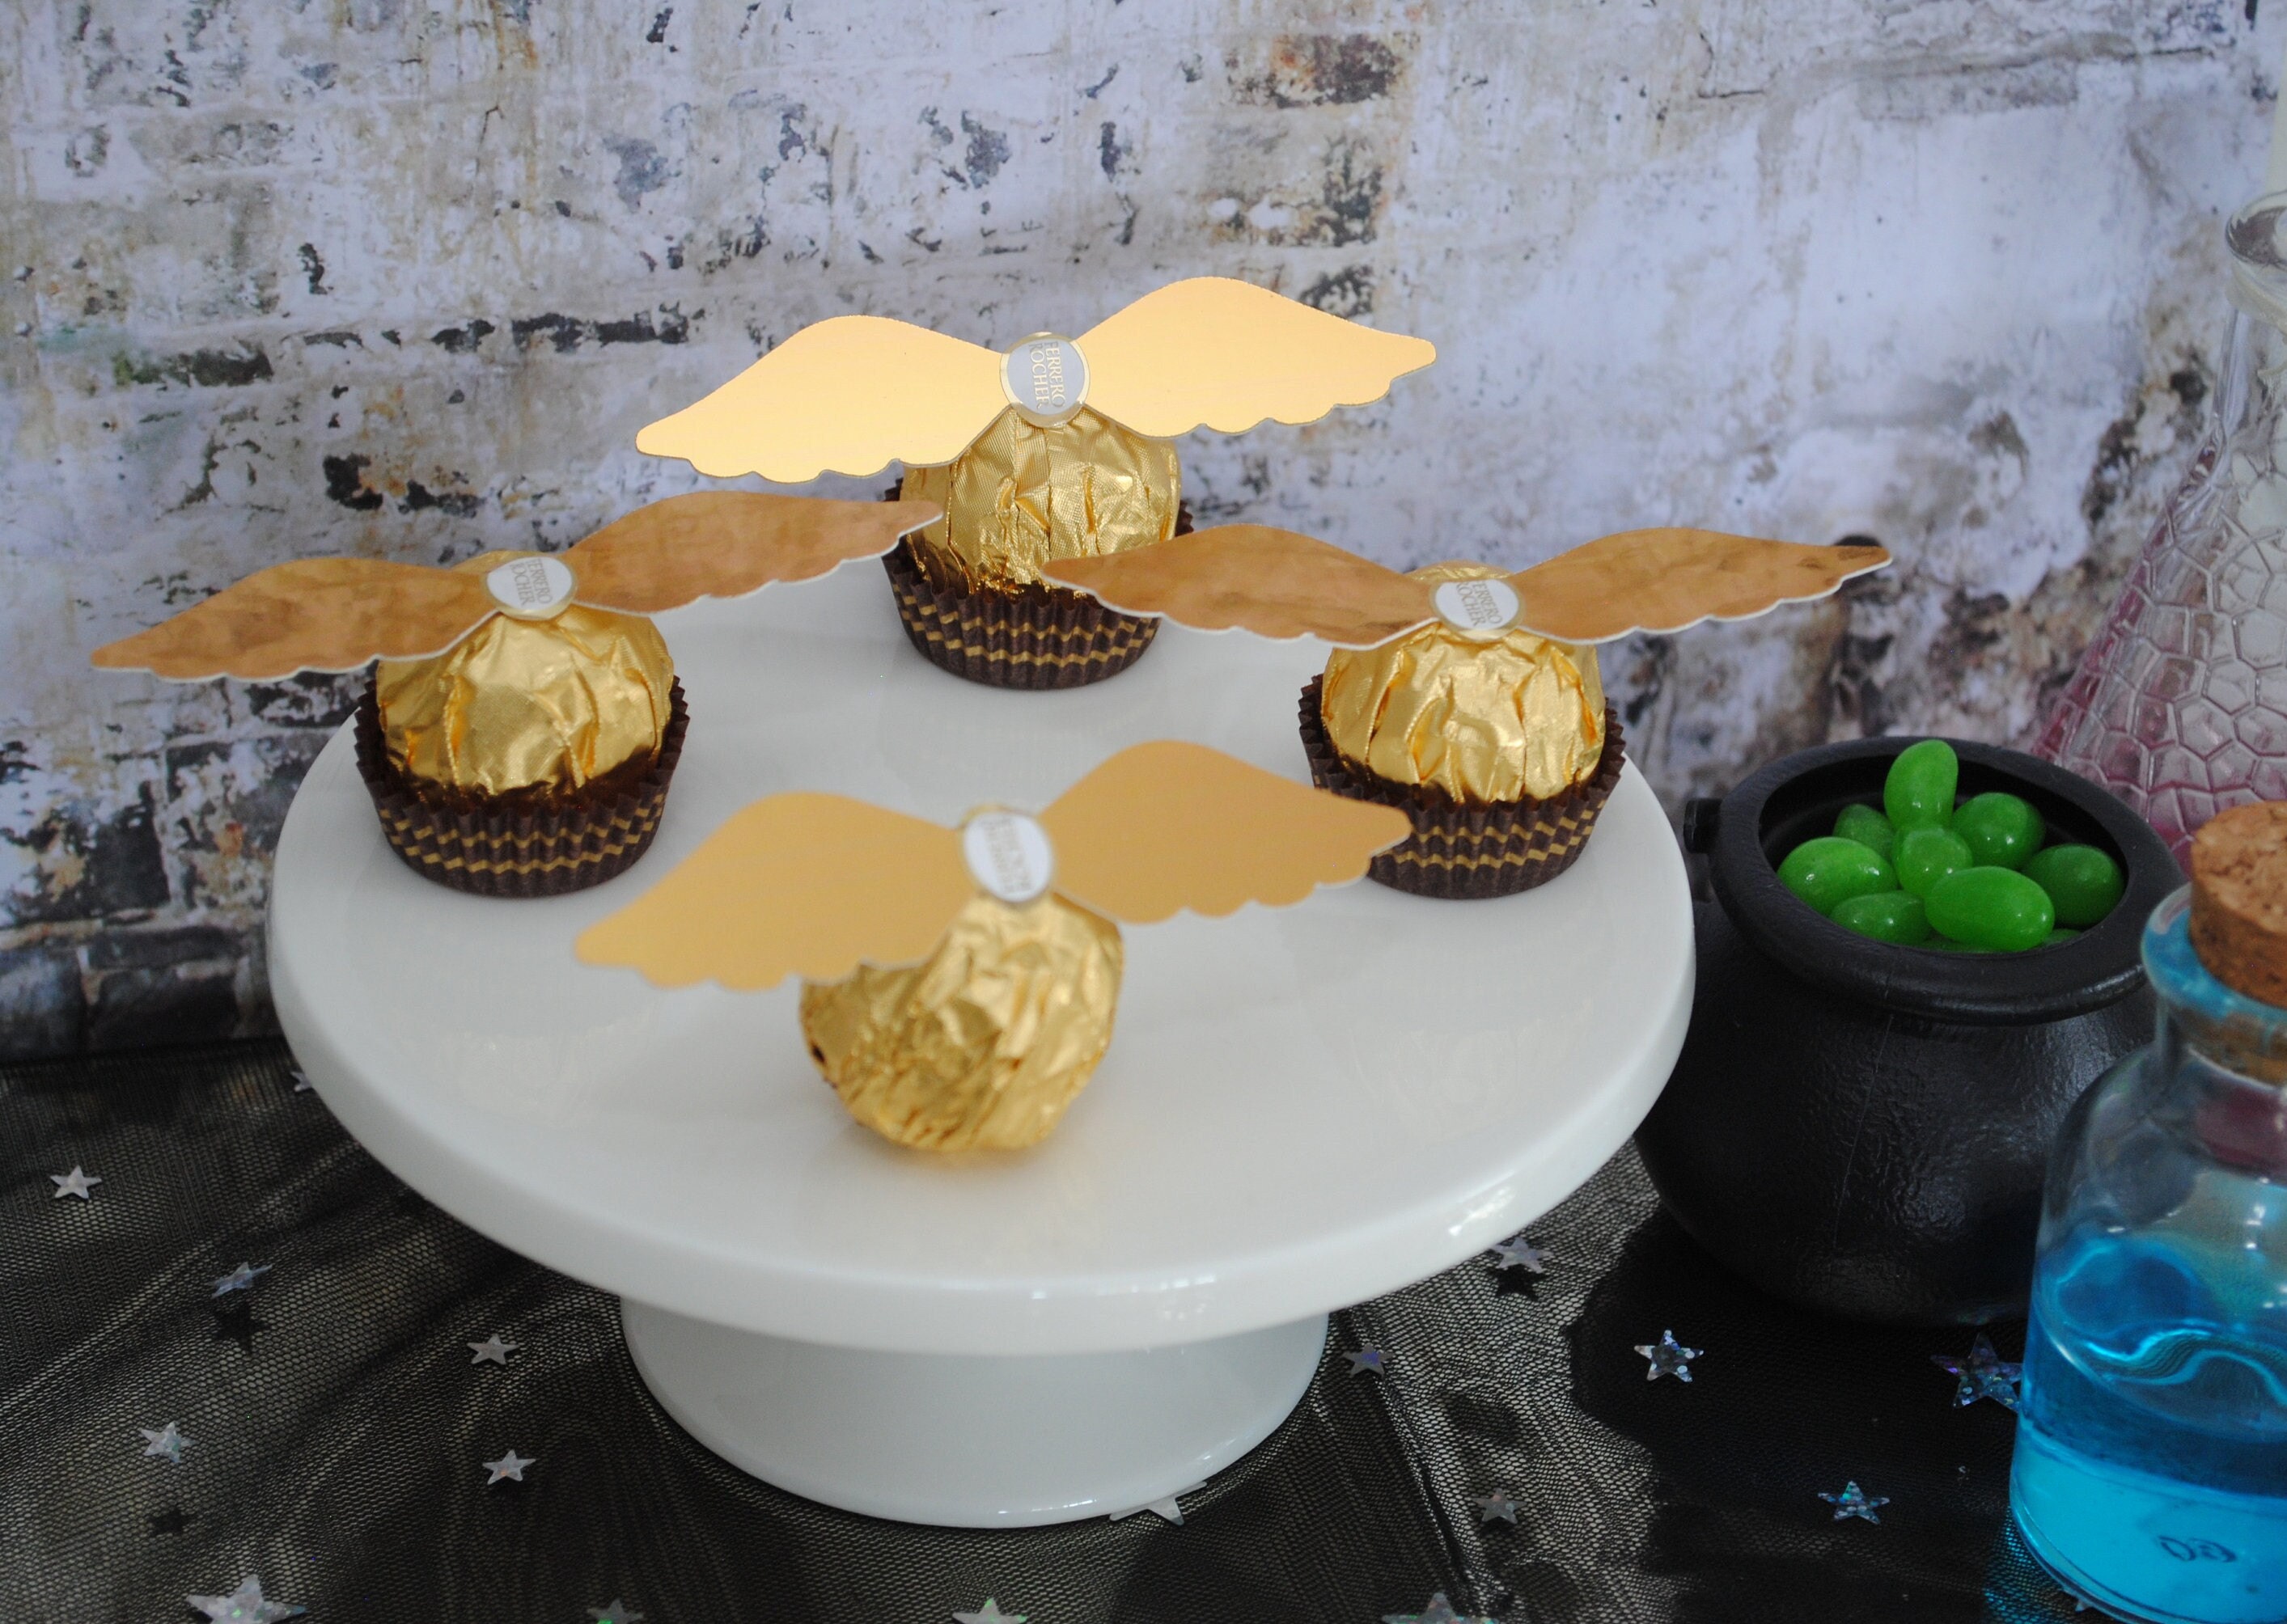 Golden Snitch Candy Wings, Golden Snitch Cake, Wings Chocolates